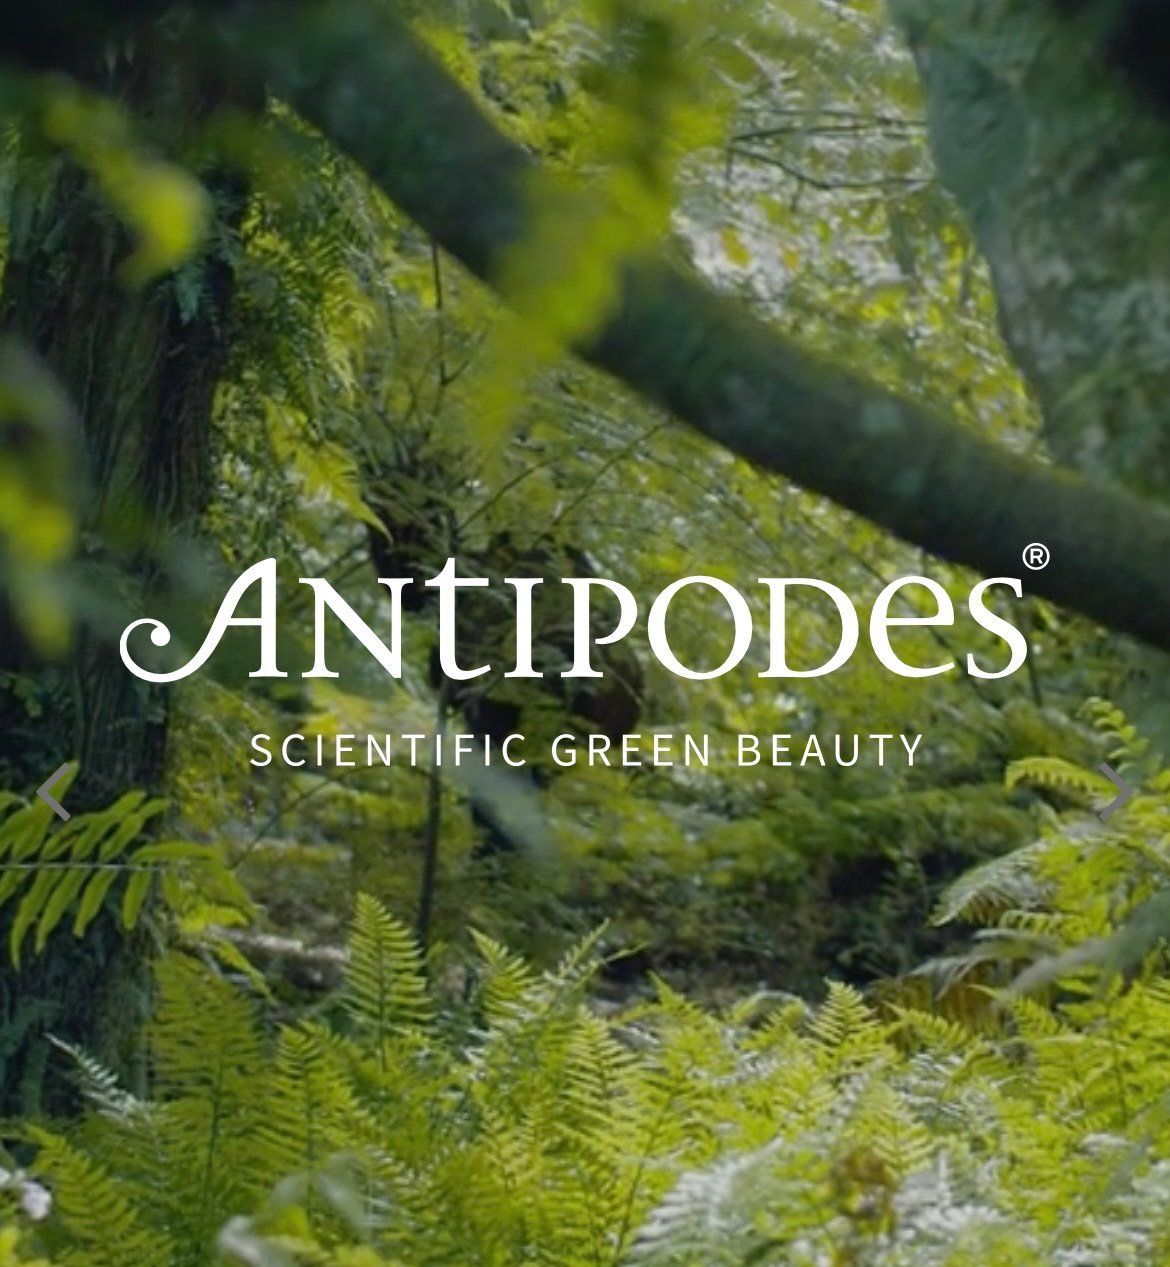 Antipodes Brand Logo amongst a New Zealand jungle with heaps of ferns, trees and greenery